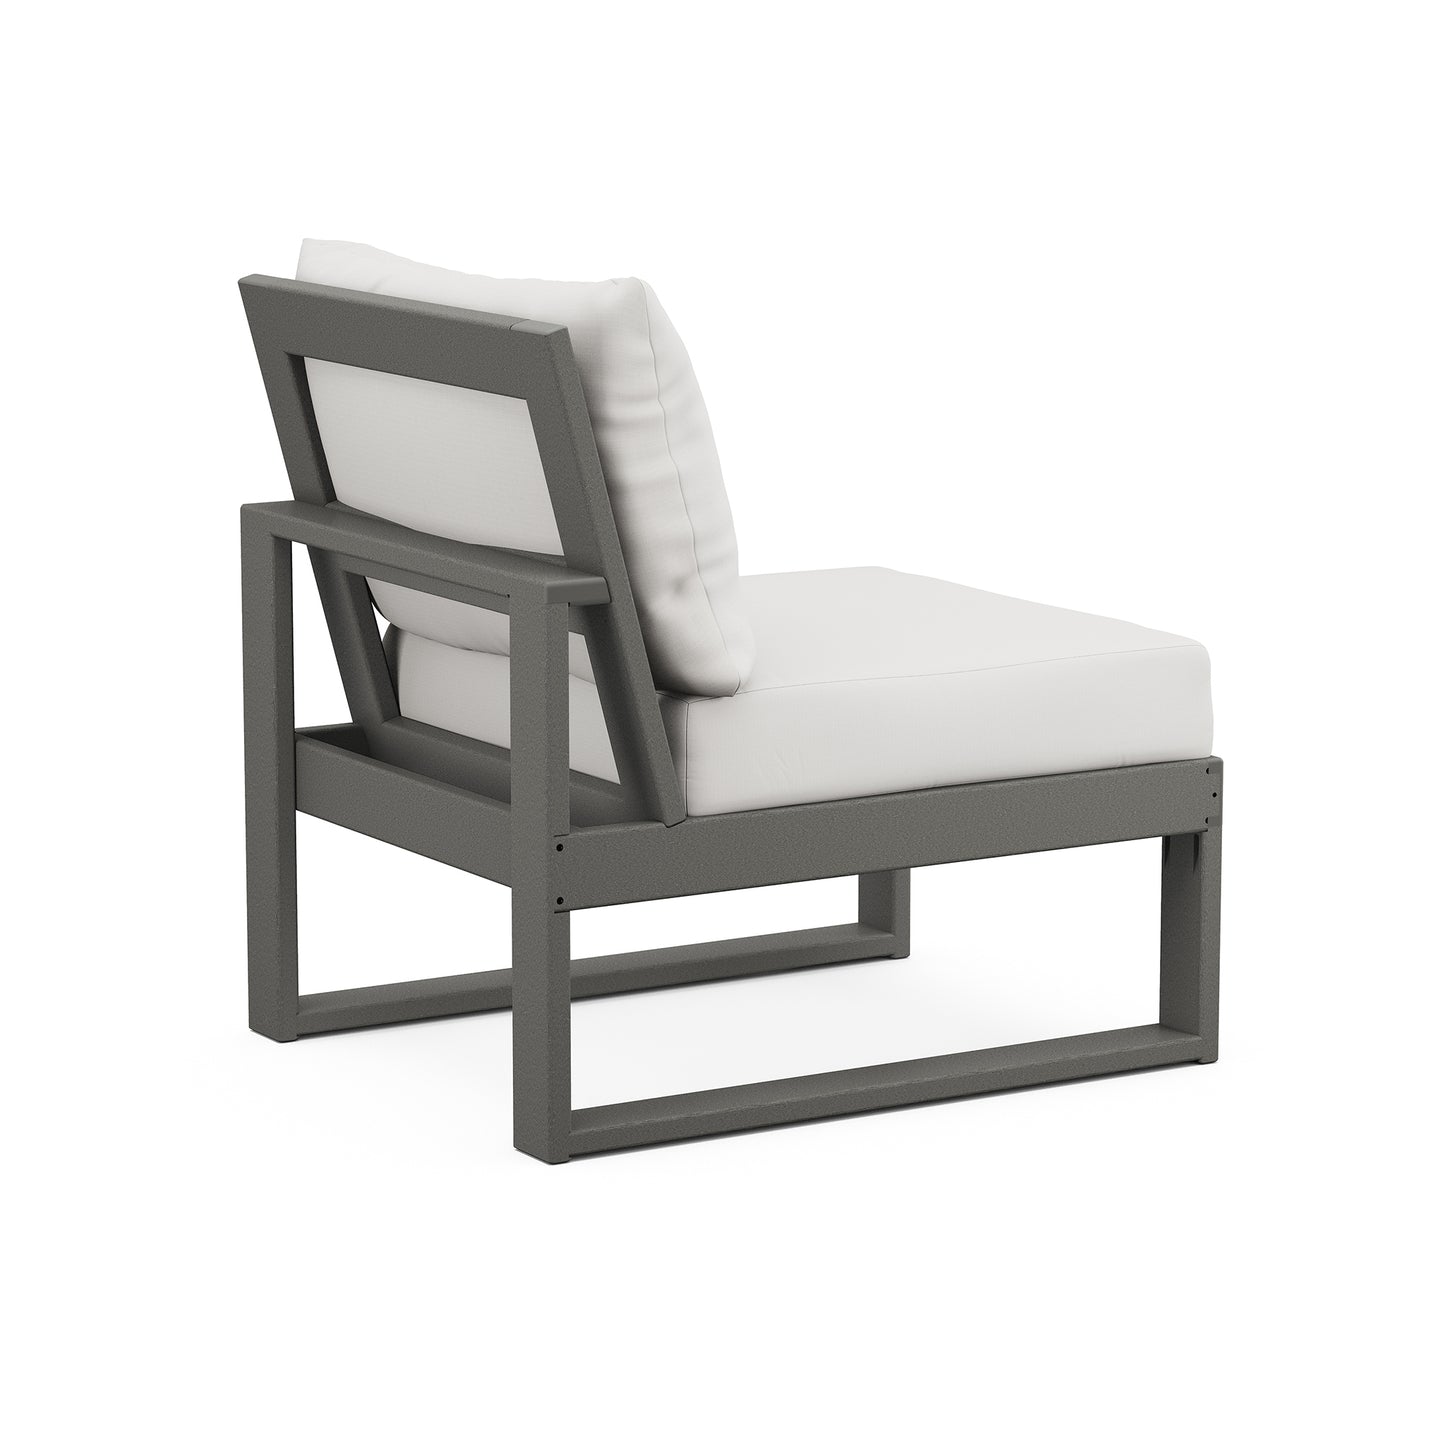 A modern POLYWOOD® Modular Armless Chair with a gray aluminum frame and white cushions, featuring a high back and a minimalist, sleek design, isolated on a white background.